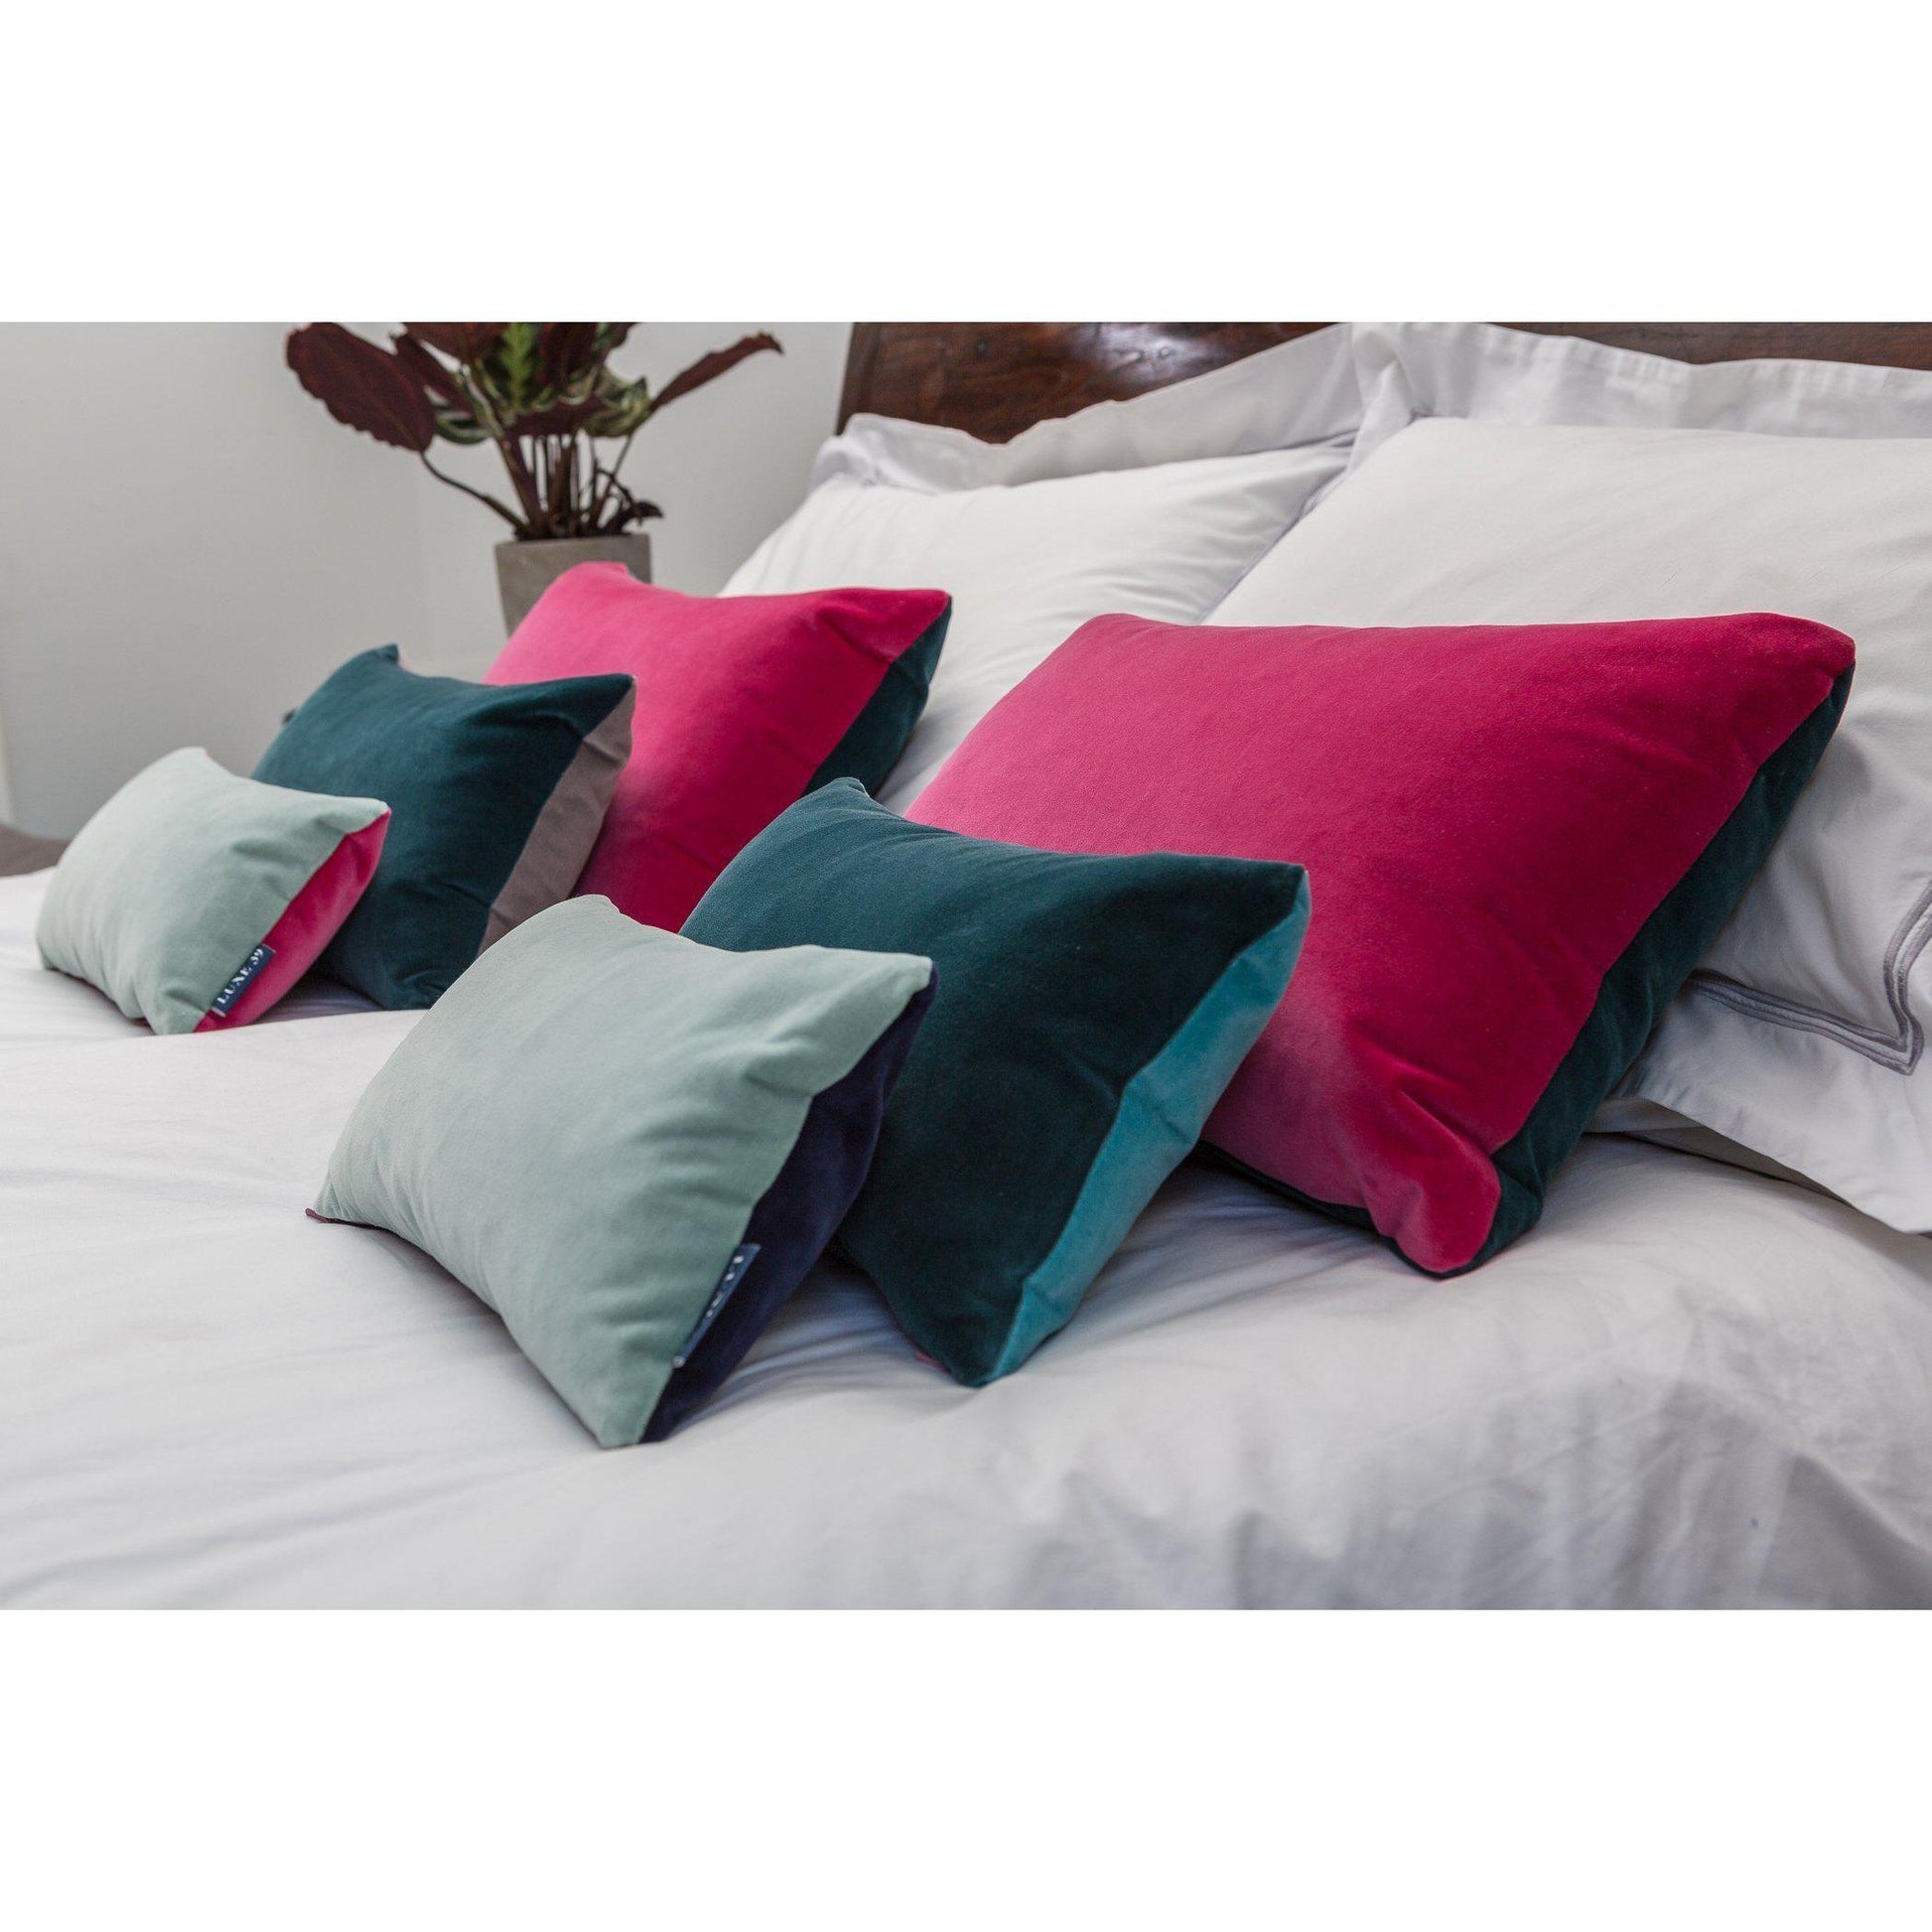 Teal Velvet Cushion with Turquoise Luxe 39